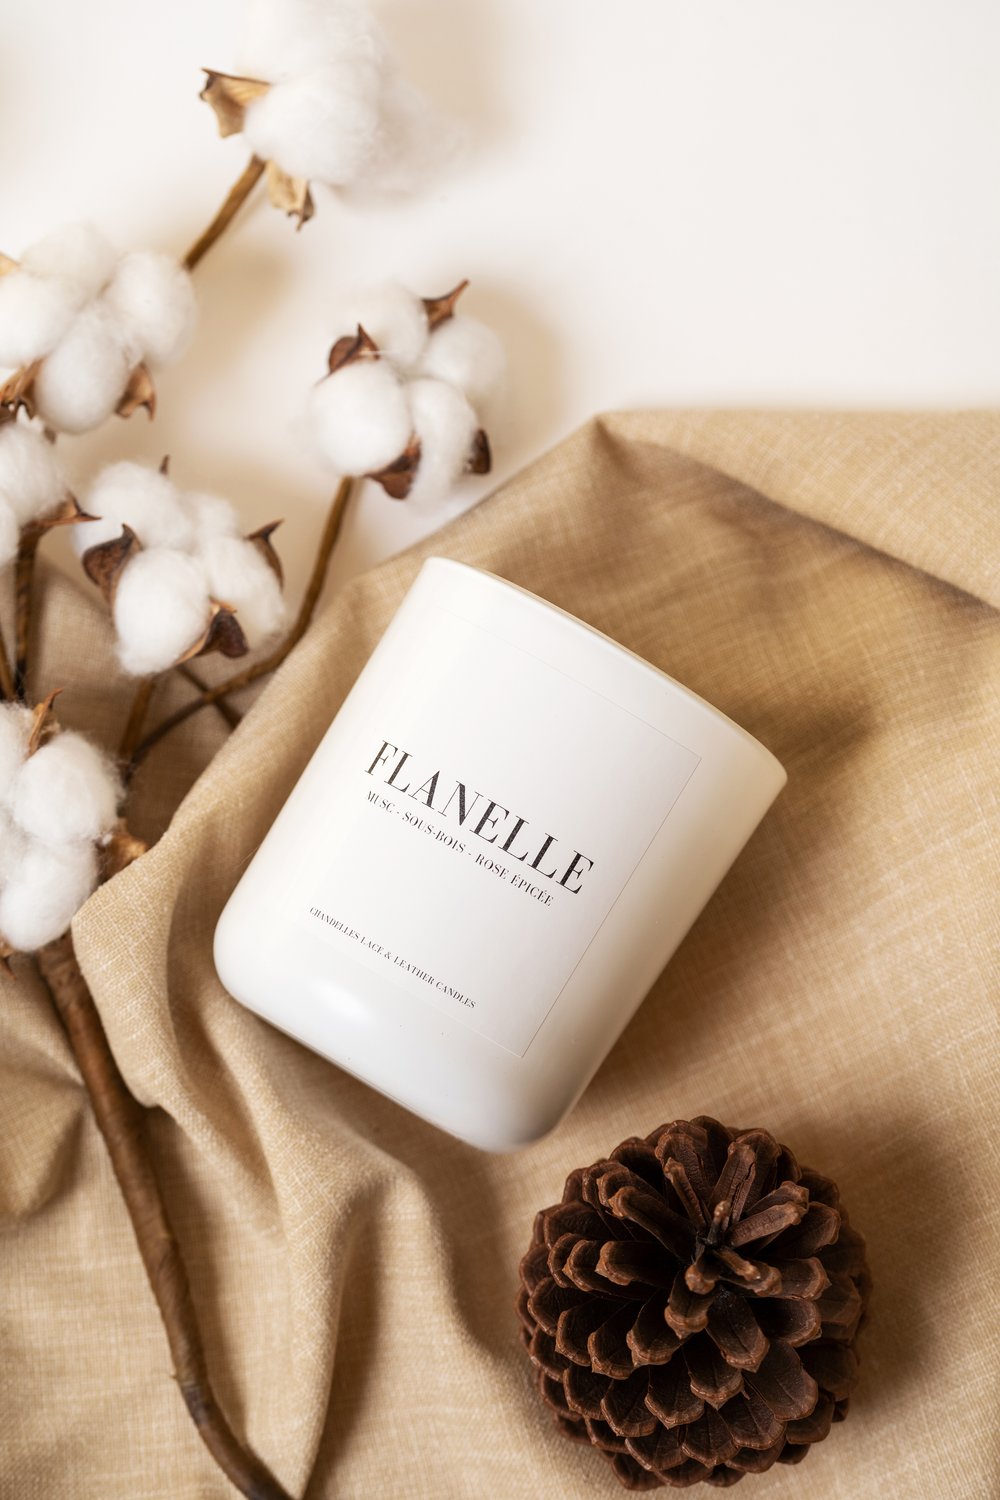 Flanelle - Lace & Leather